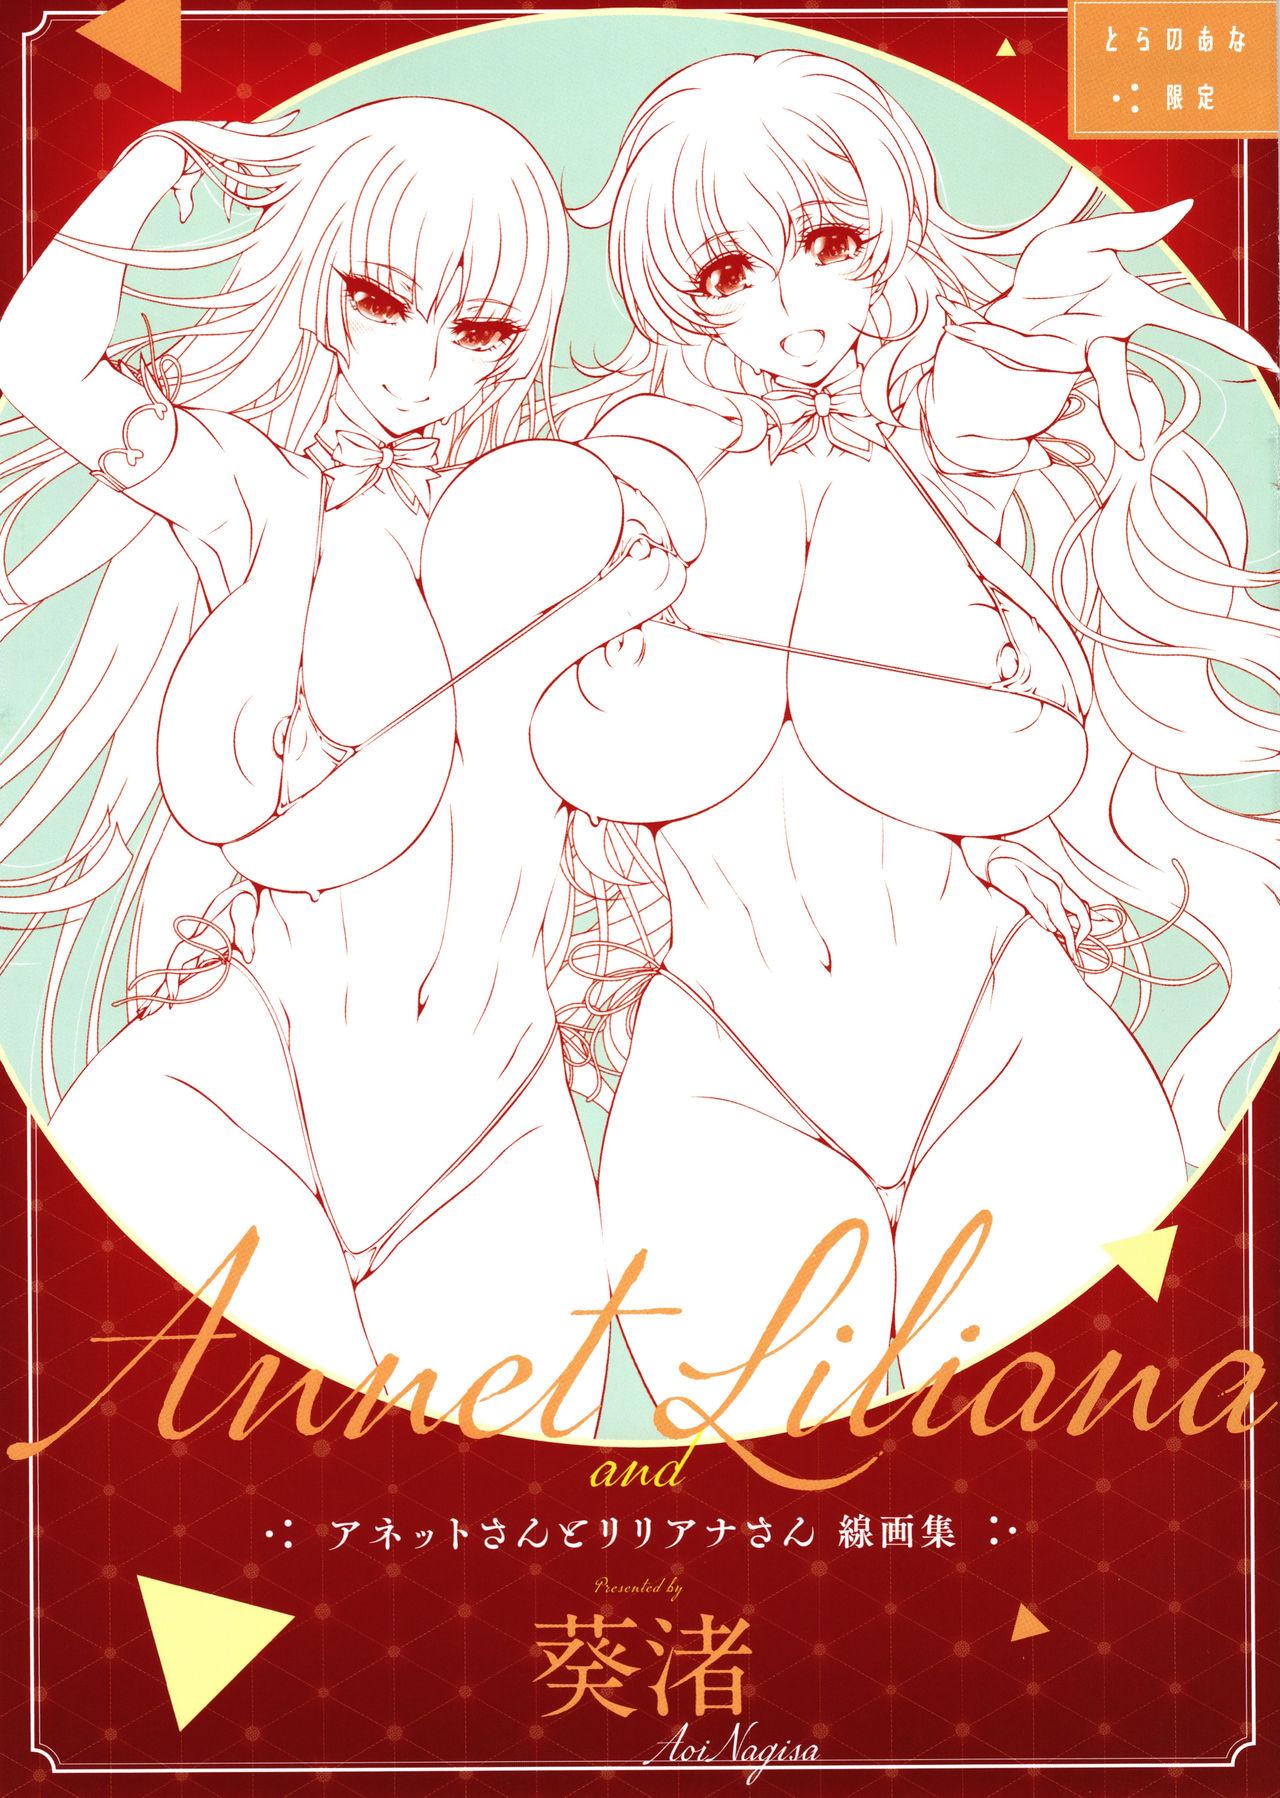 ANNET & LILIANA First Edition 169